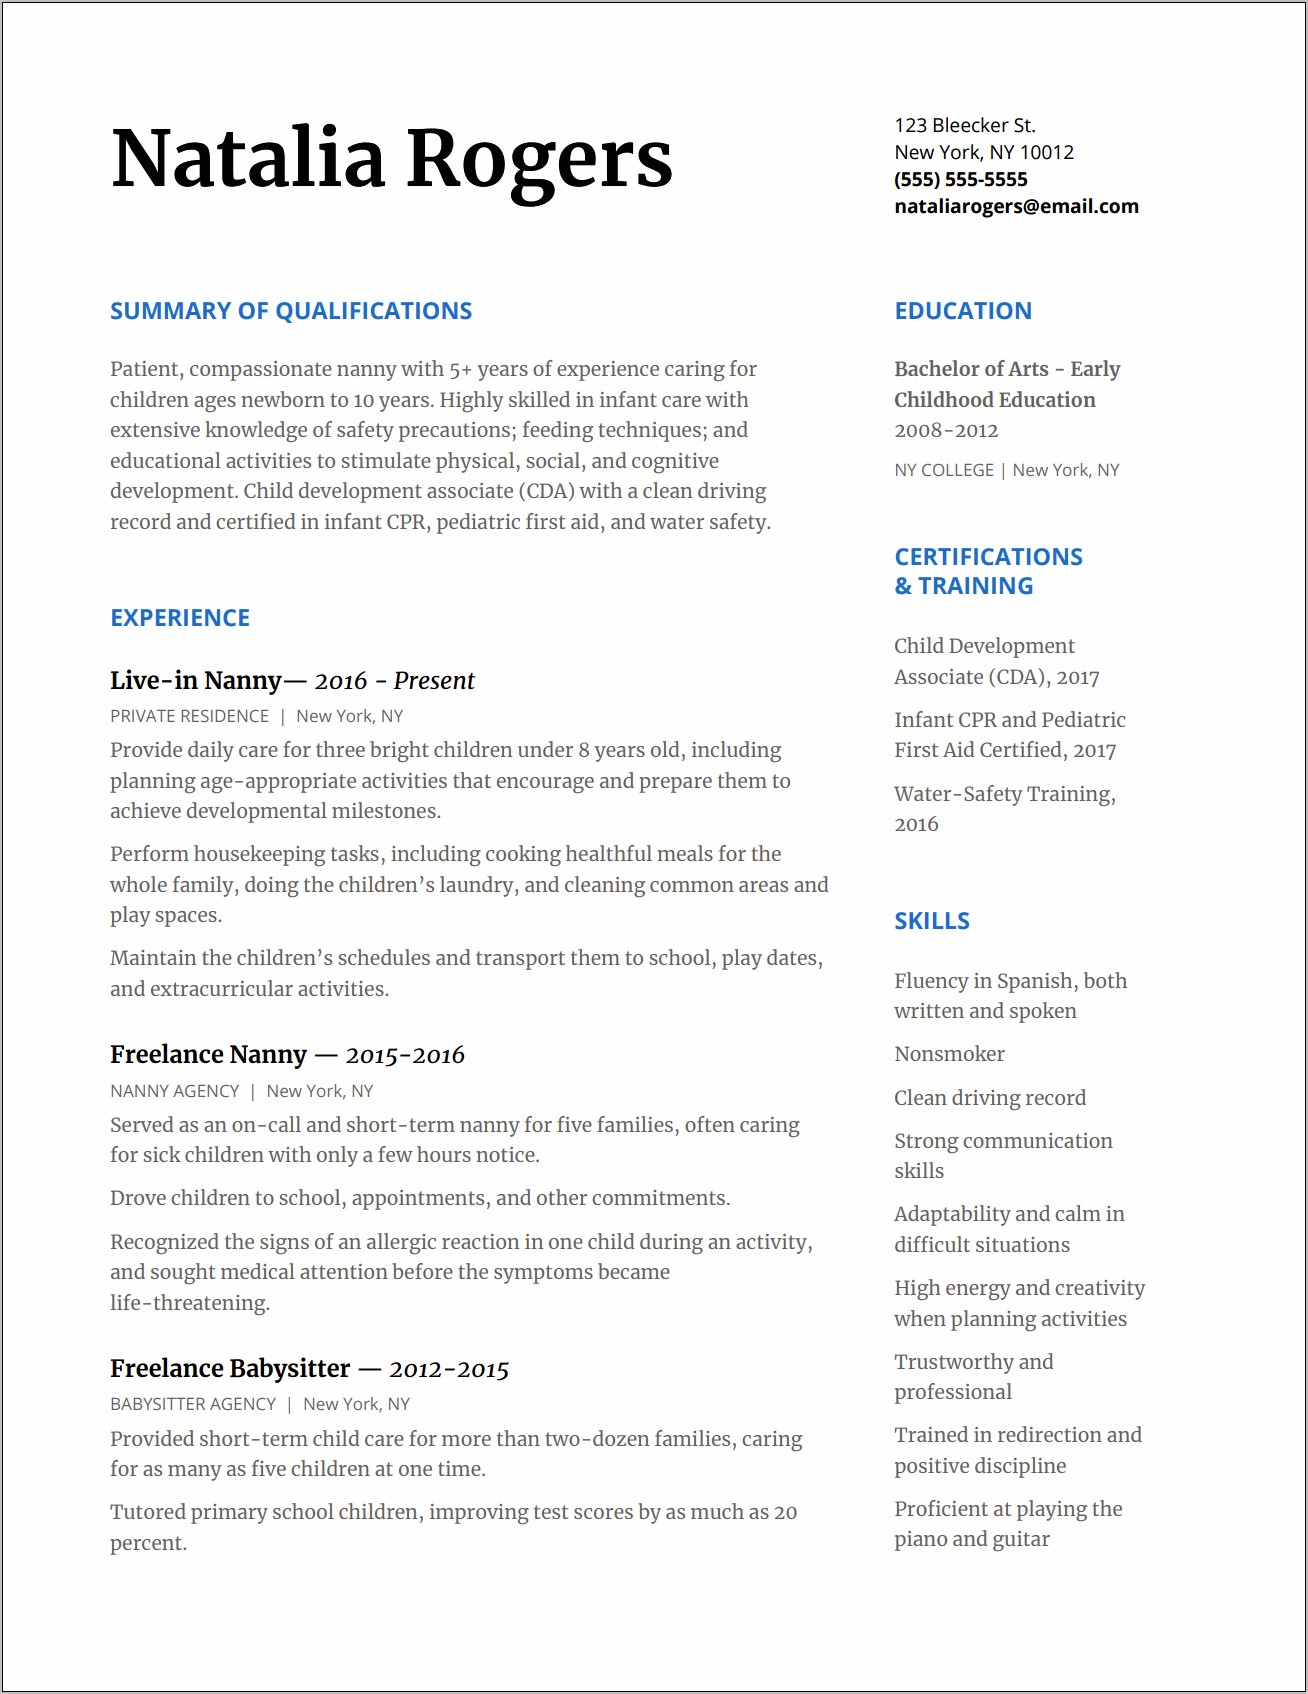 Sample Resume With Babysitting Experience